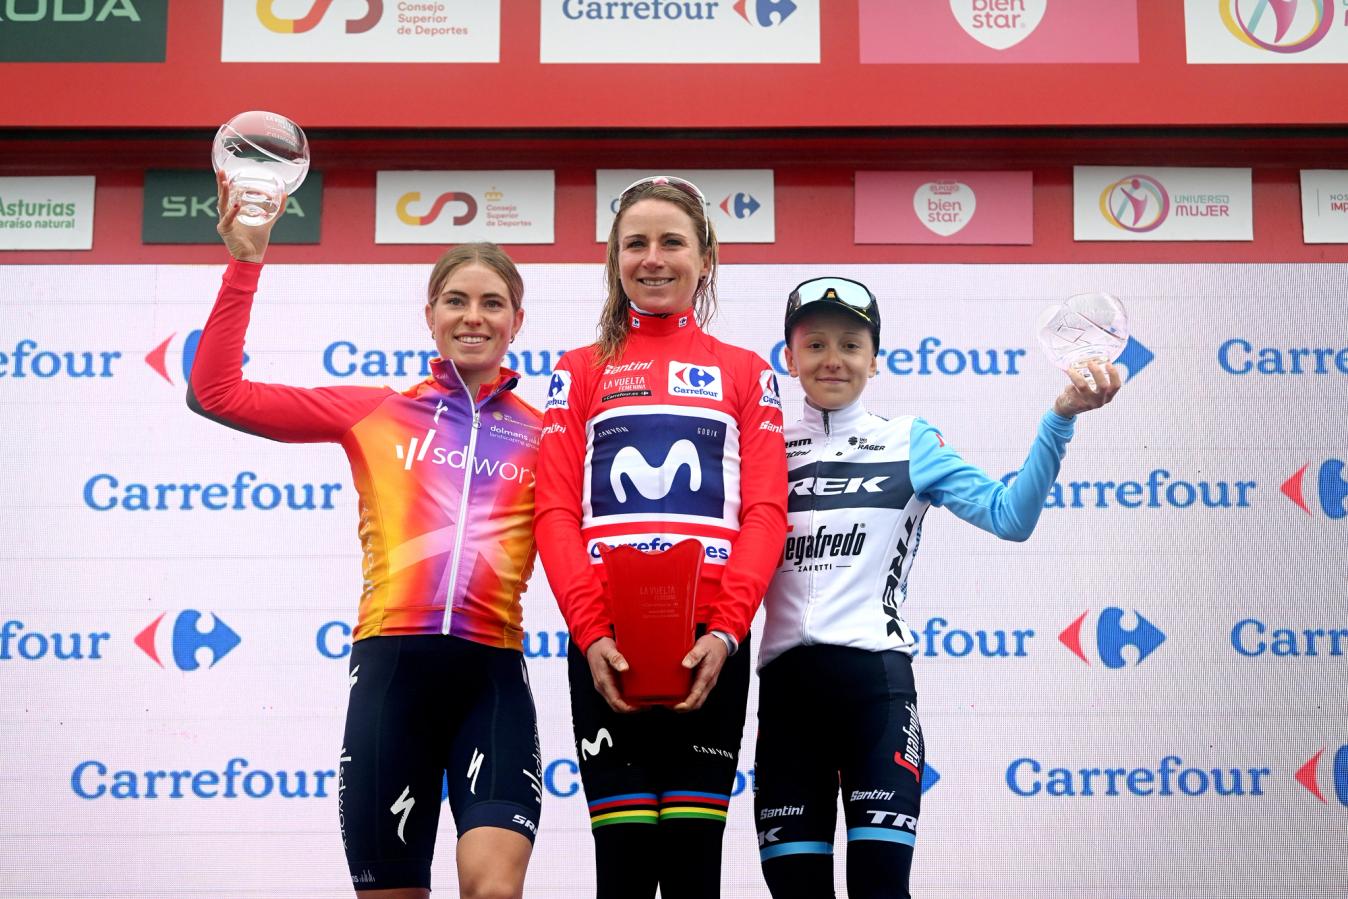 Pictured here alongside Demi Vollering (left) and Annemiek van Vleuten (middle), Gaia Realini climbed with the very best at La Vuelta Femenina and even came away with a stage win